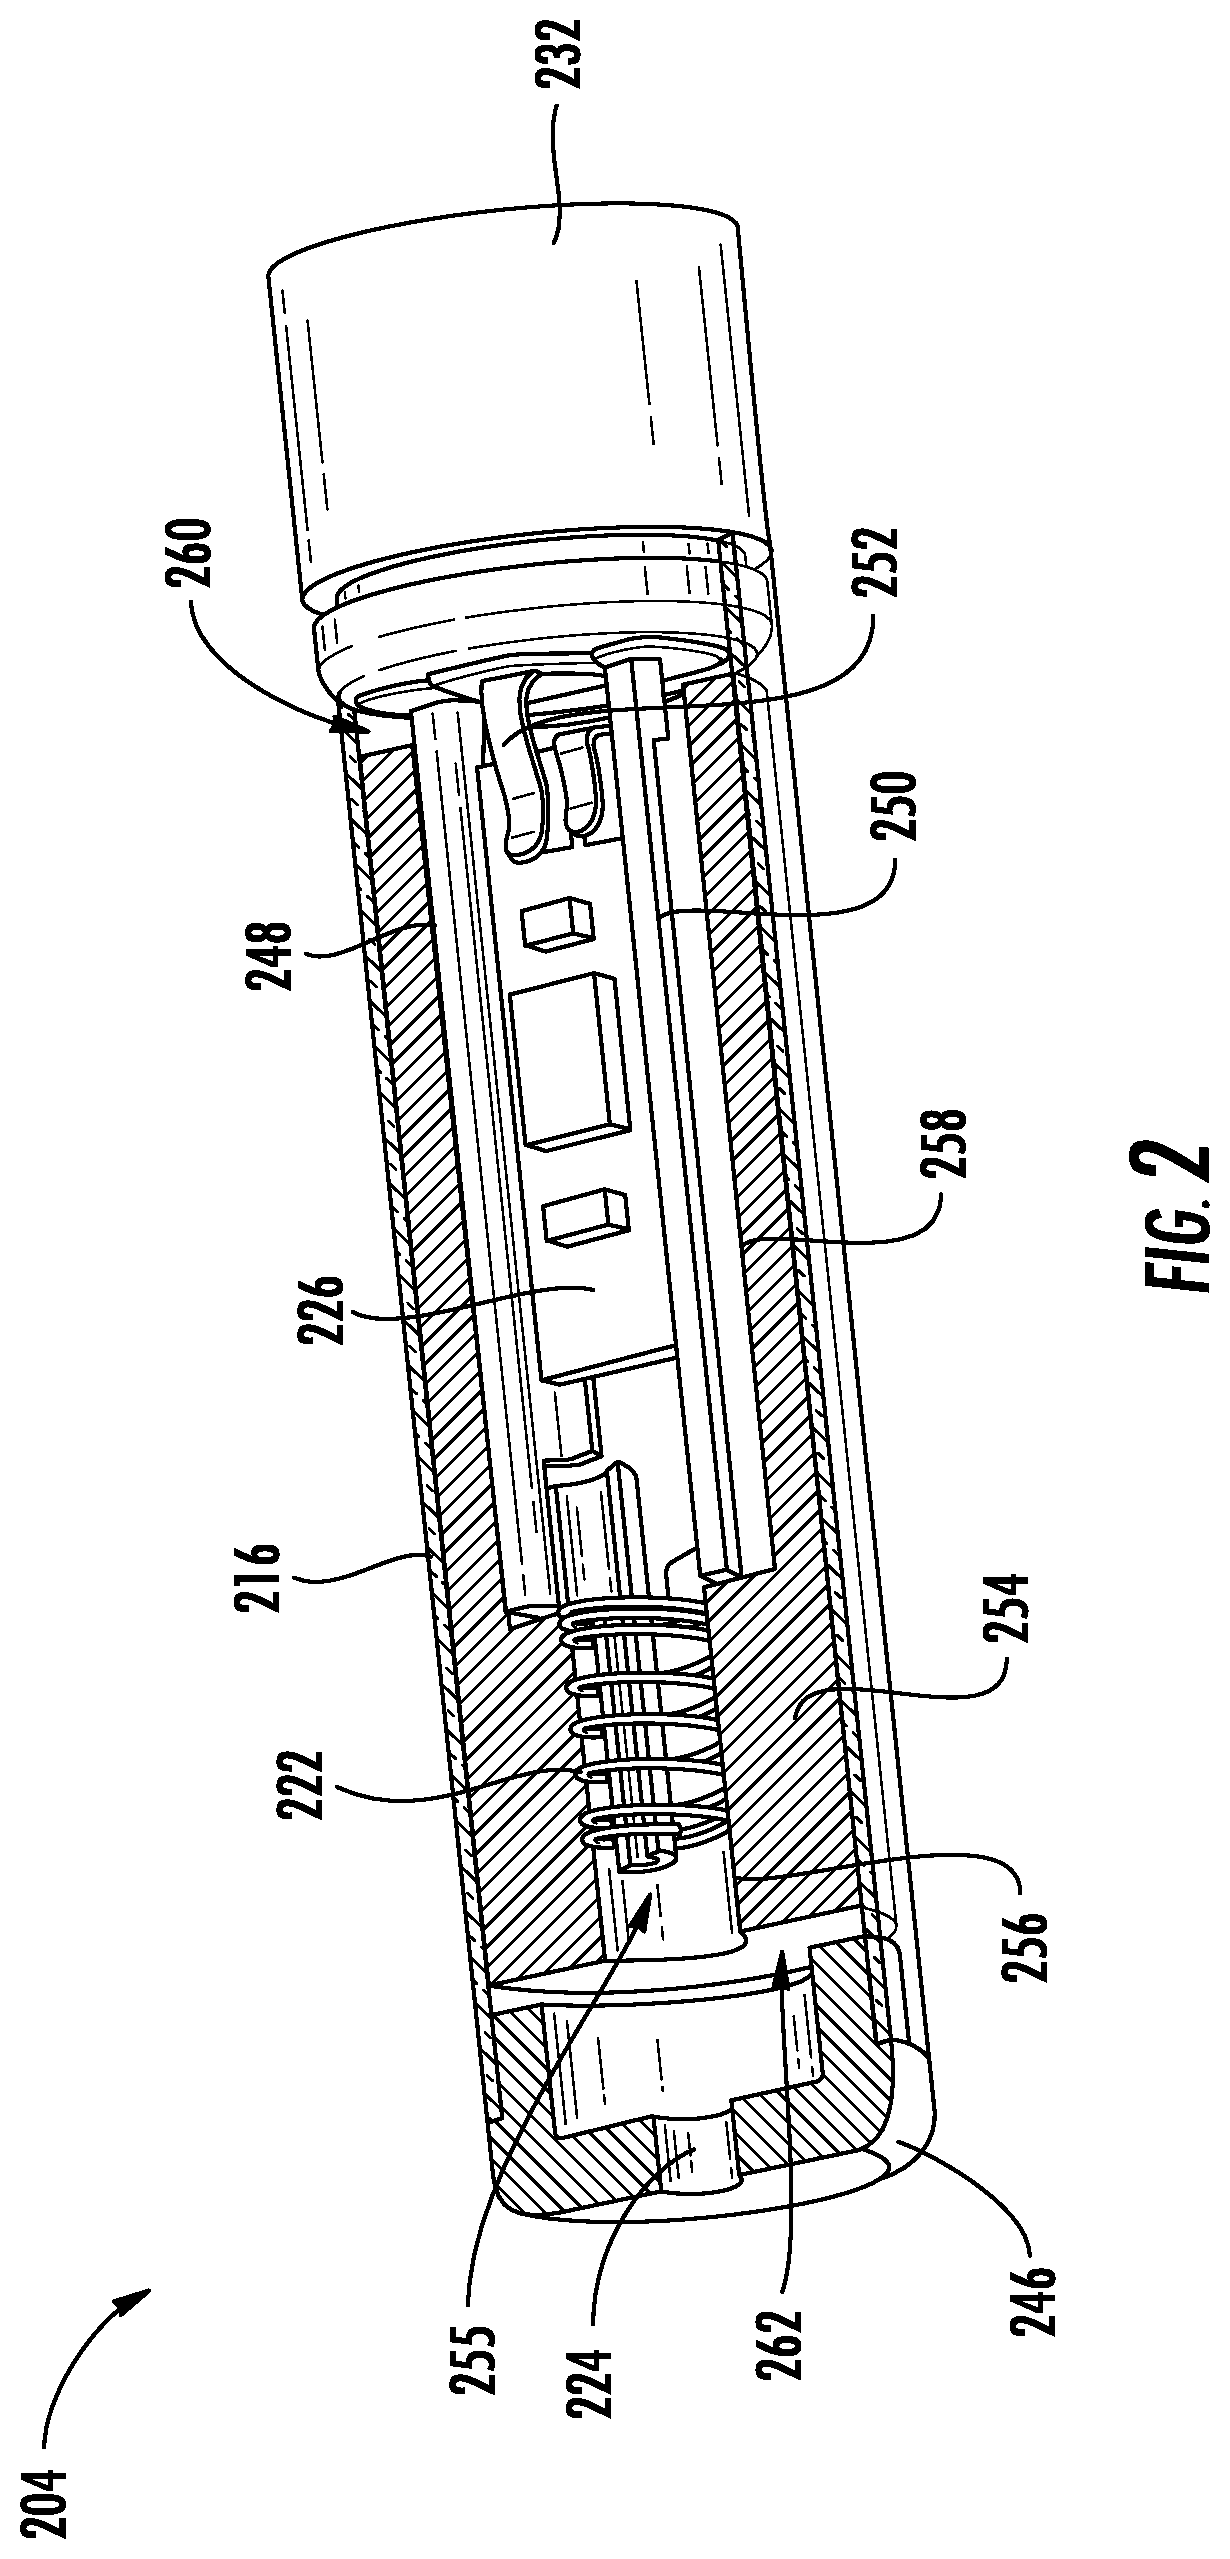 Aerosol delivery device with a unitary reservoir and liquid transport element comprising a porous monolith and related method